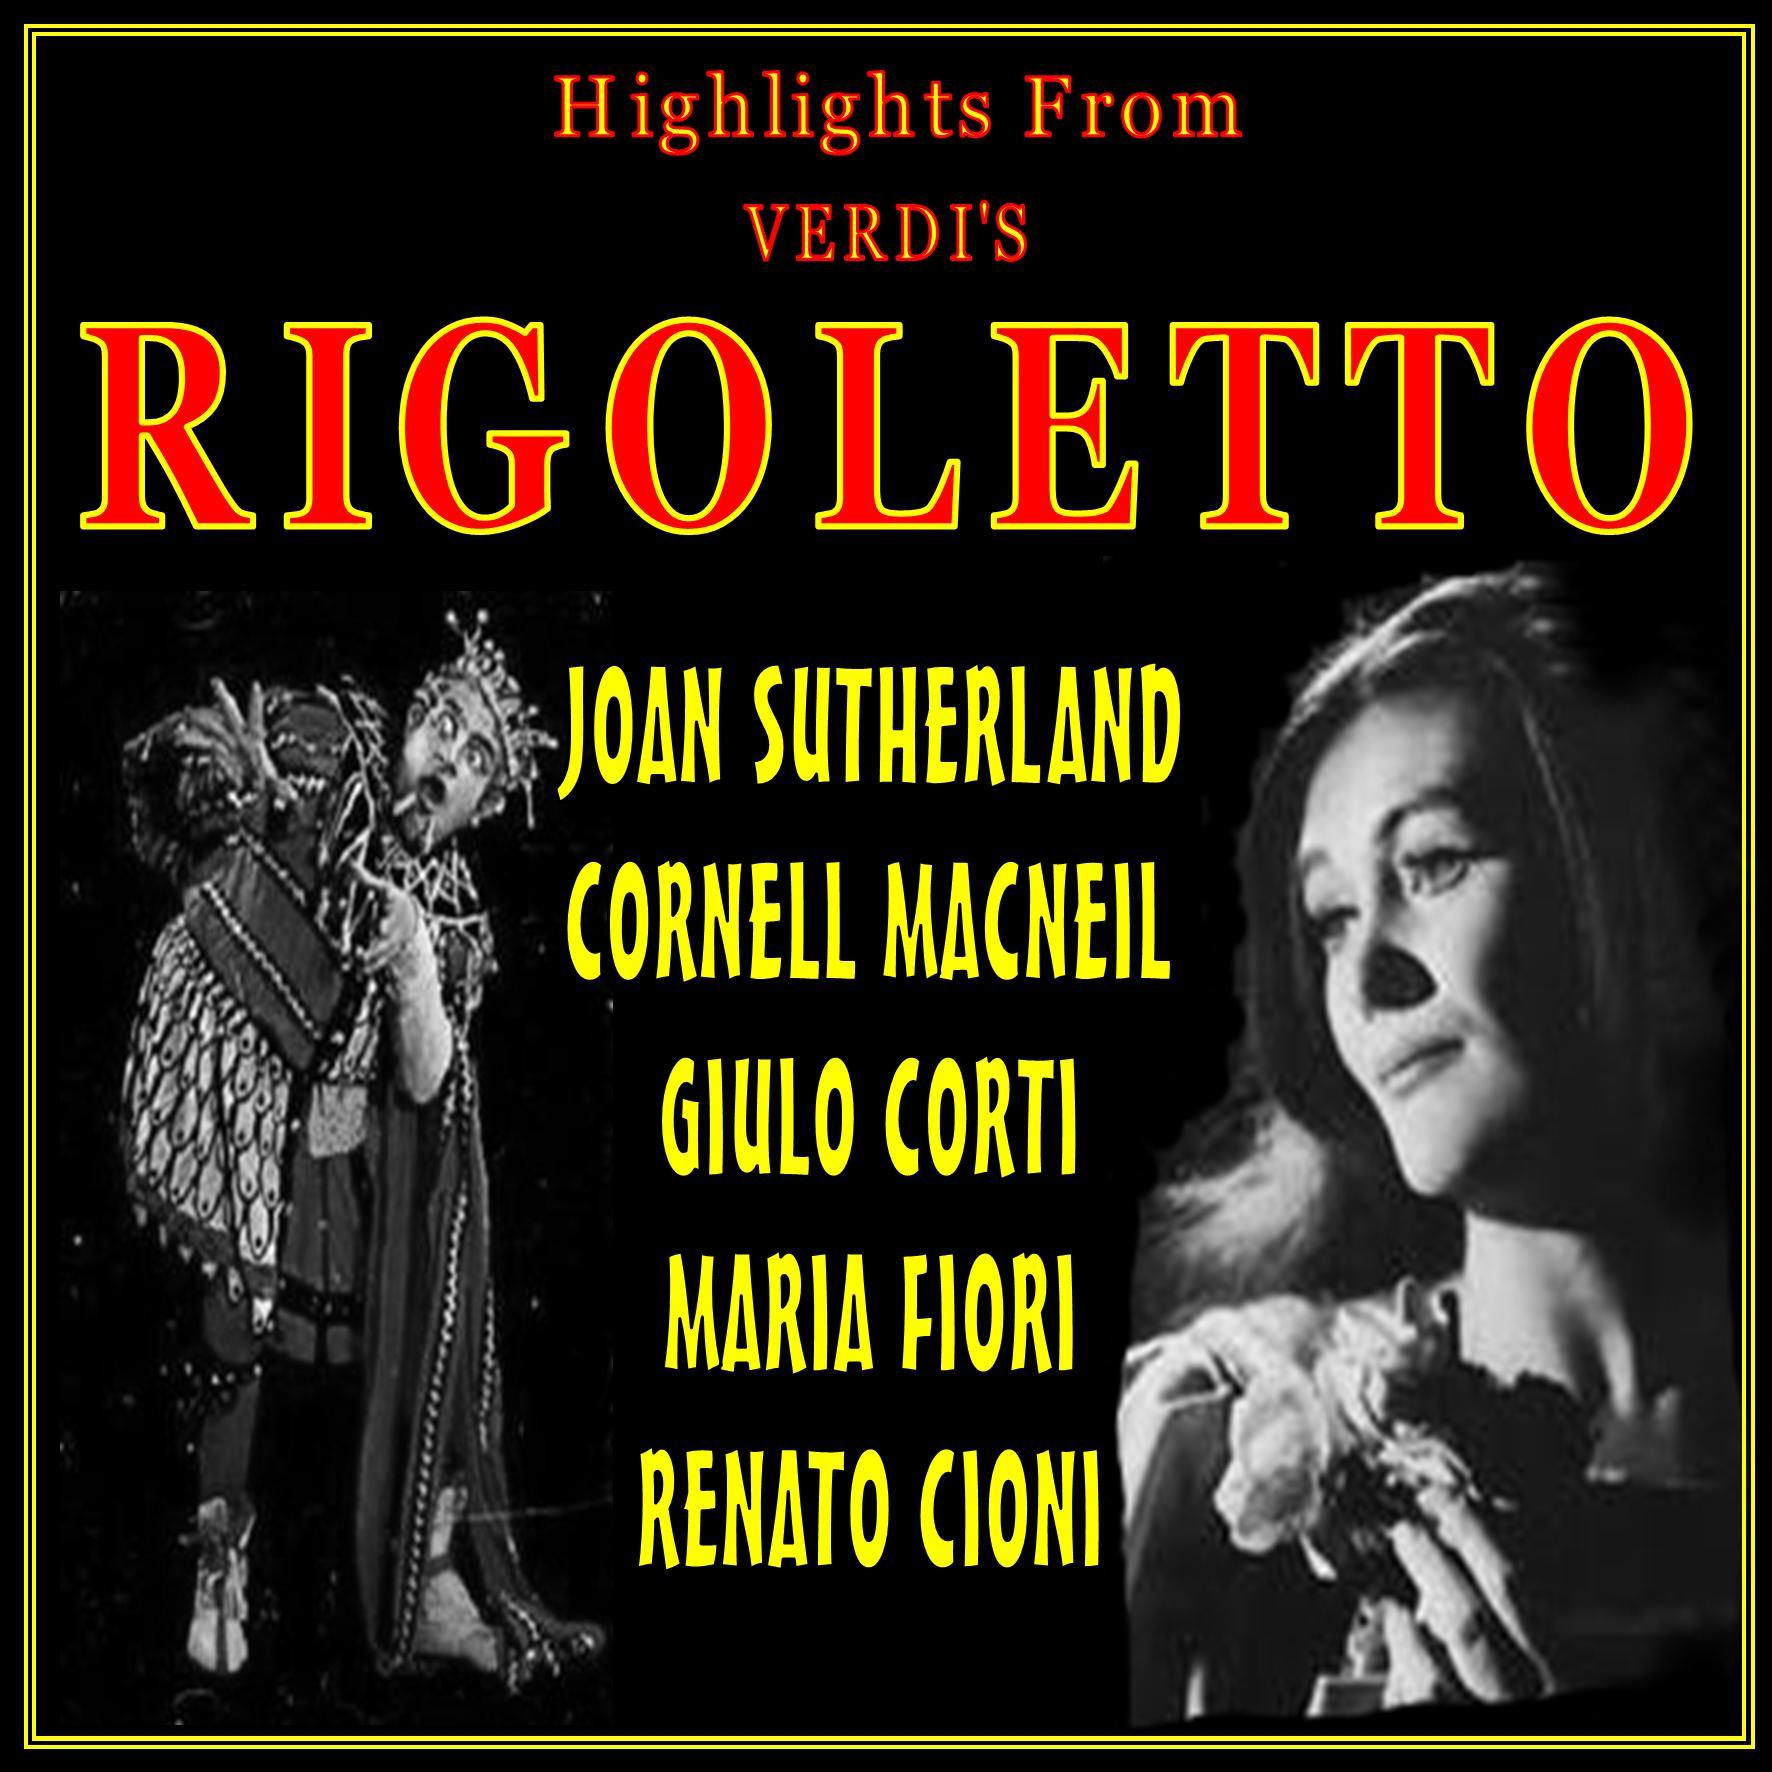 Rigoletto:With Joan Sutherland and Cornell Macneil